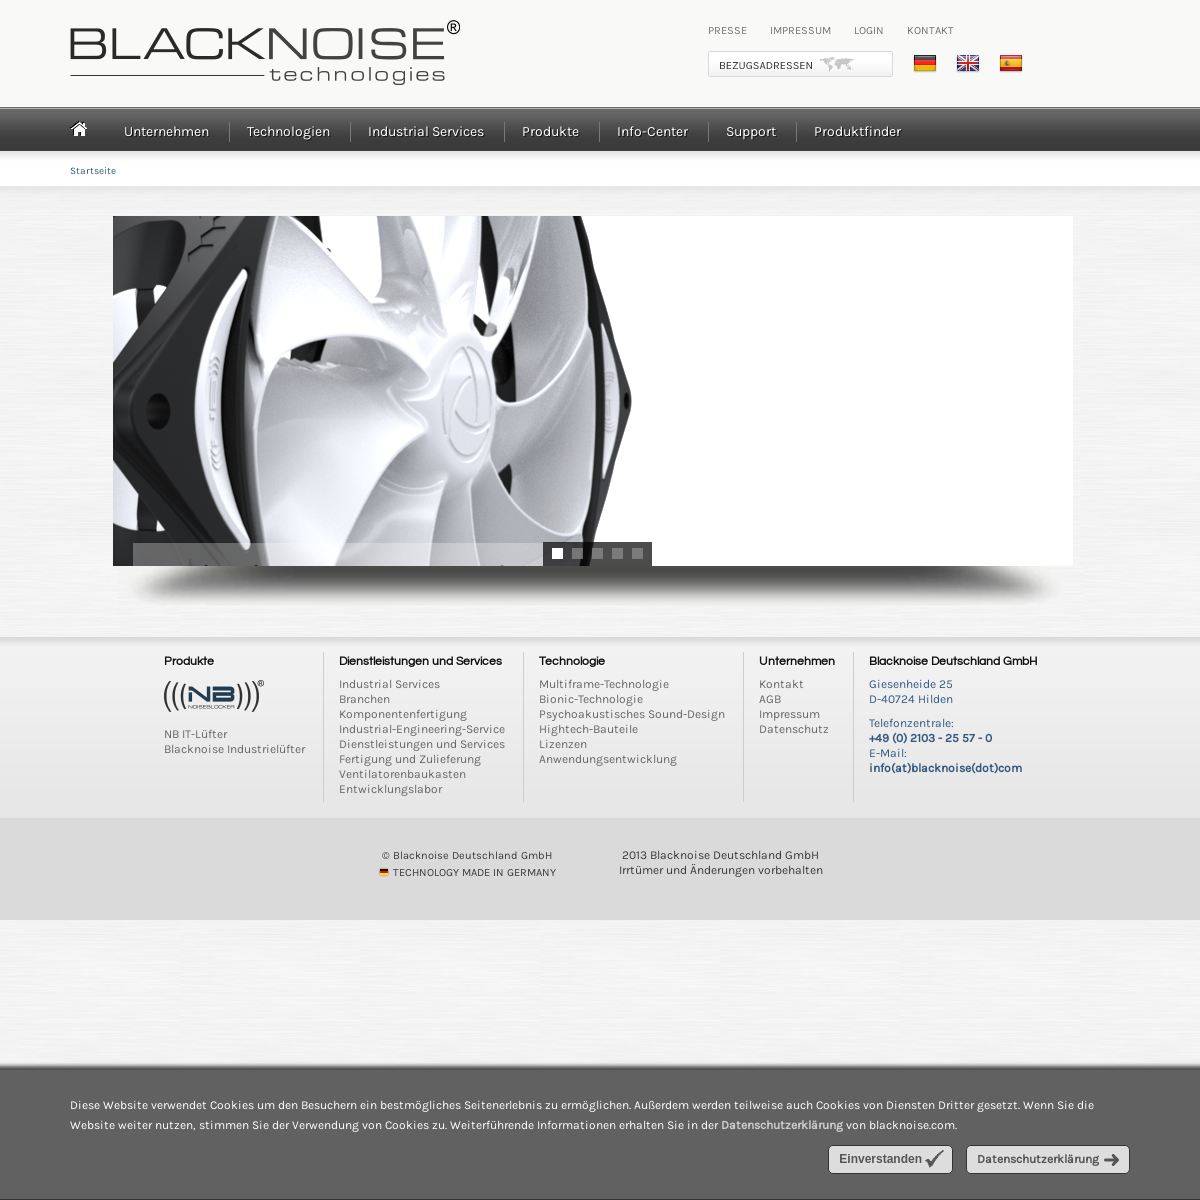 A complete backup of blacknoise.com